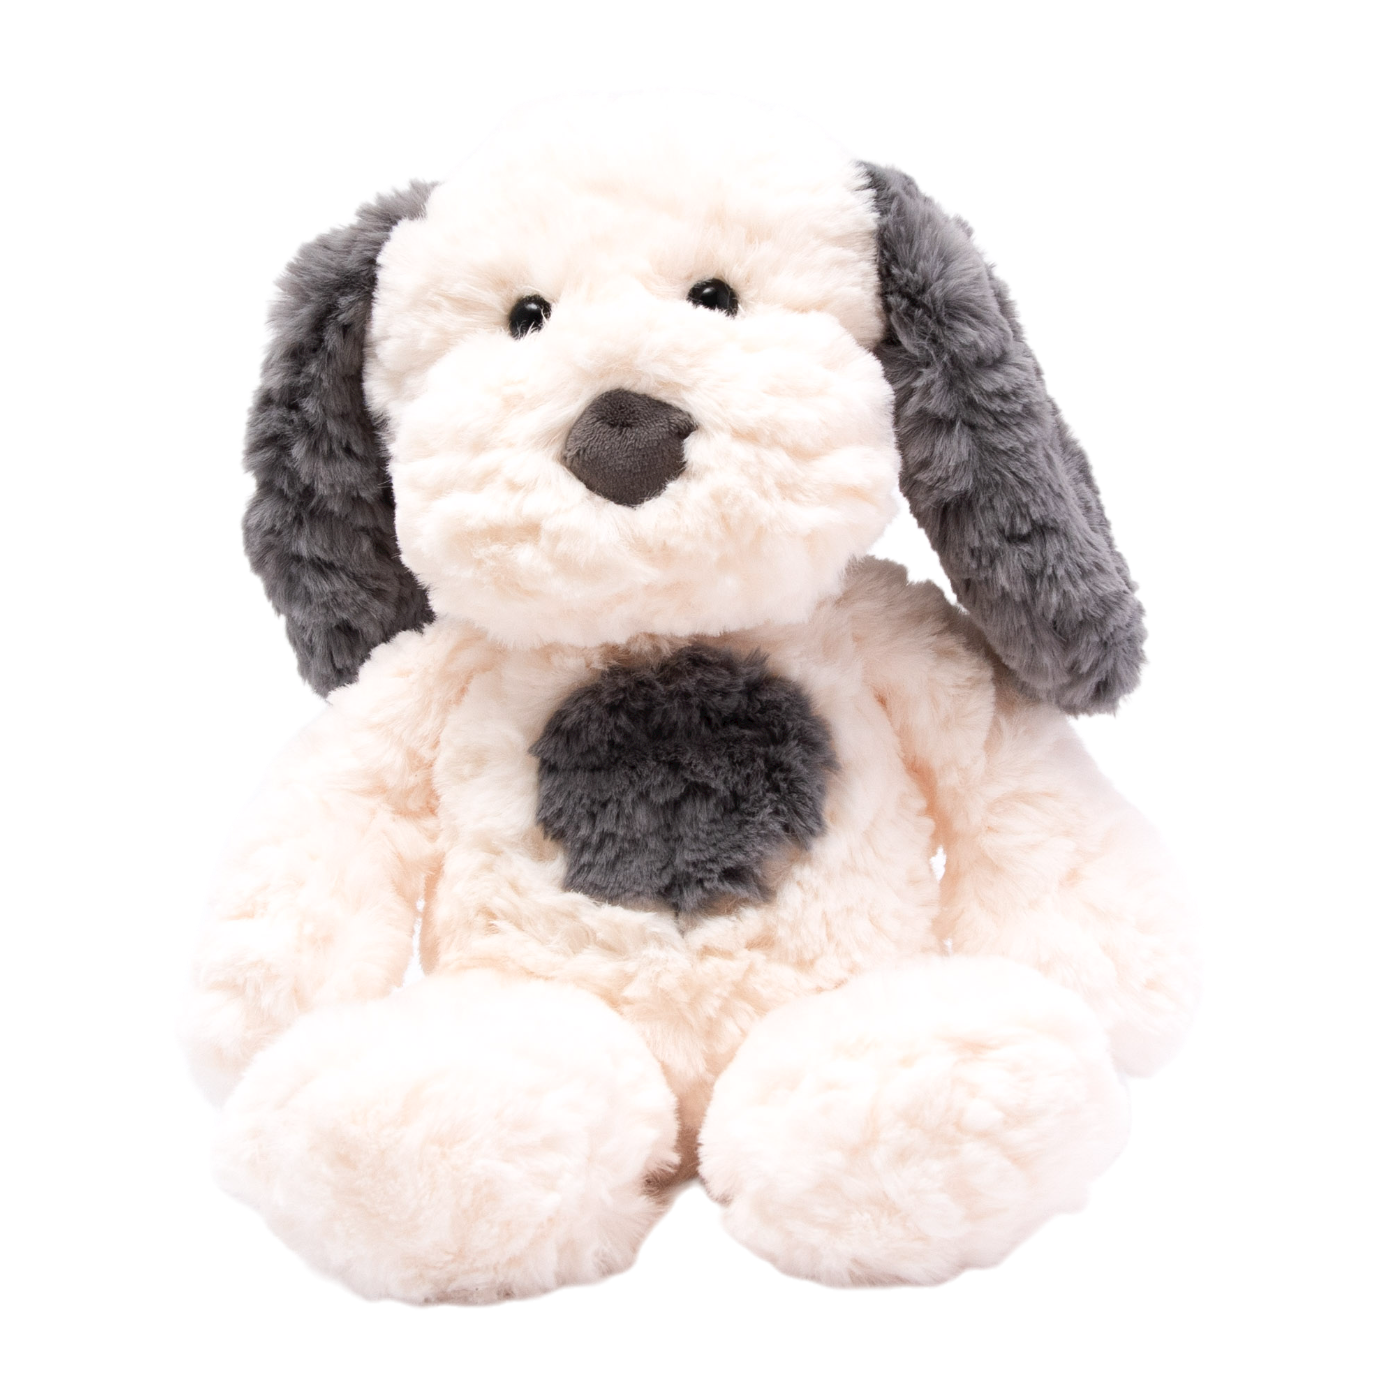 Petite Vous Henry the Dog Soft Toy